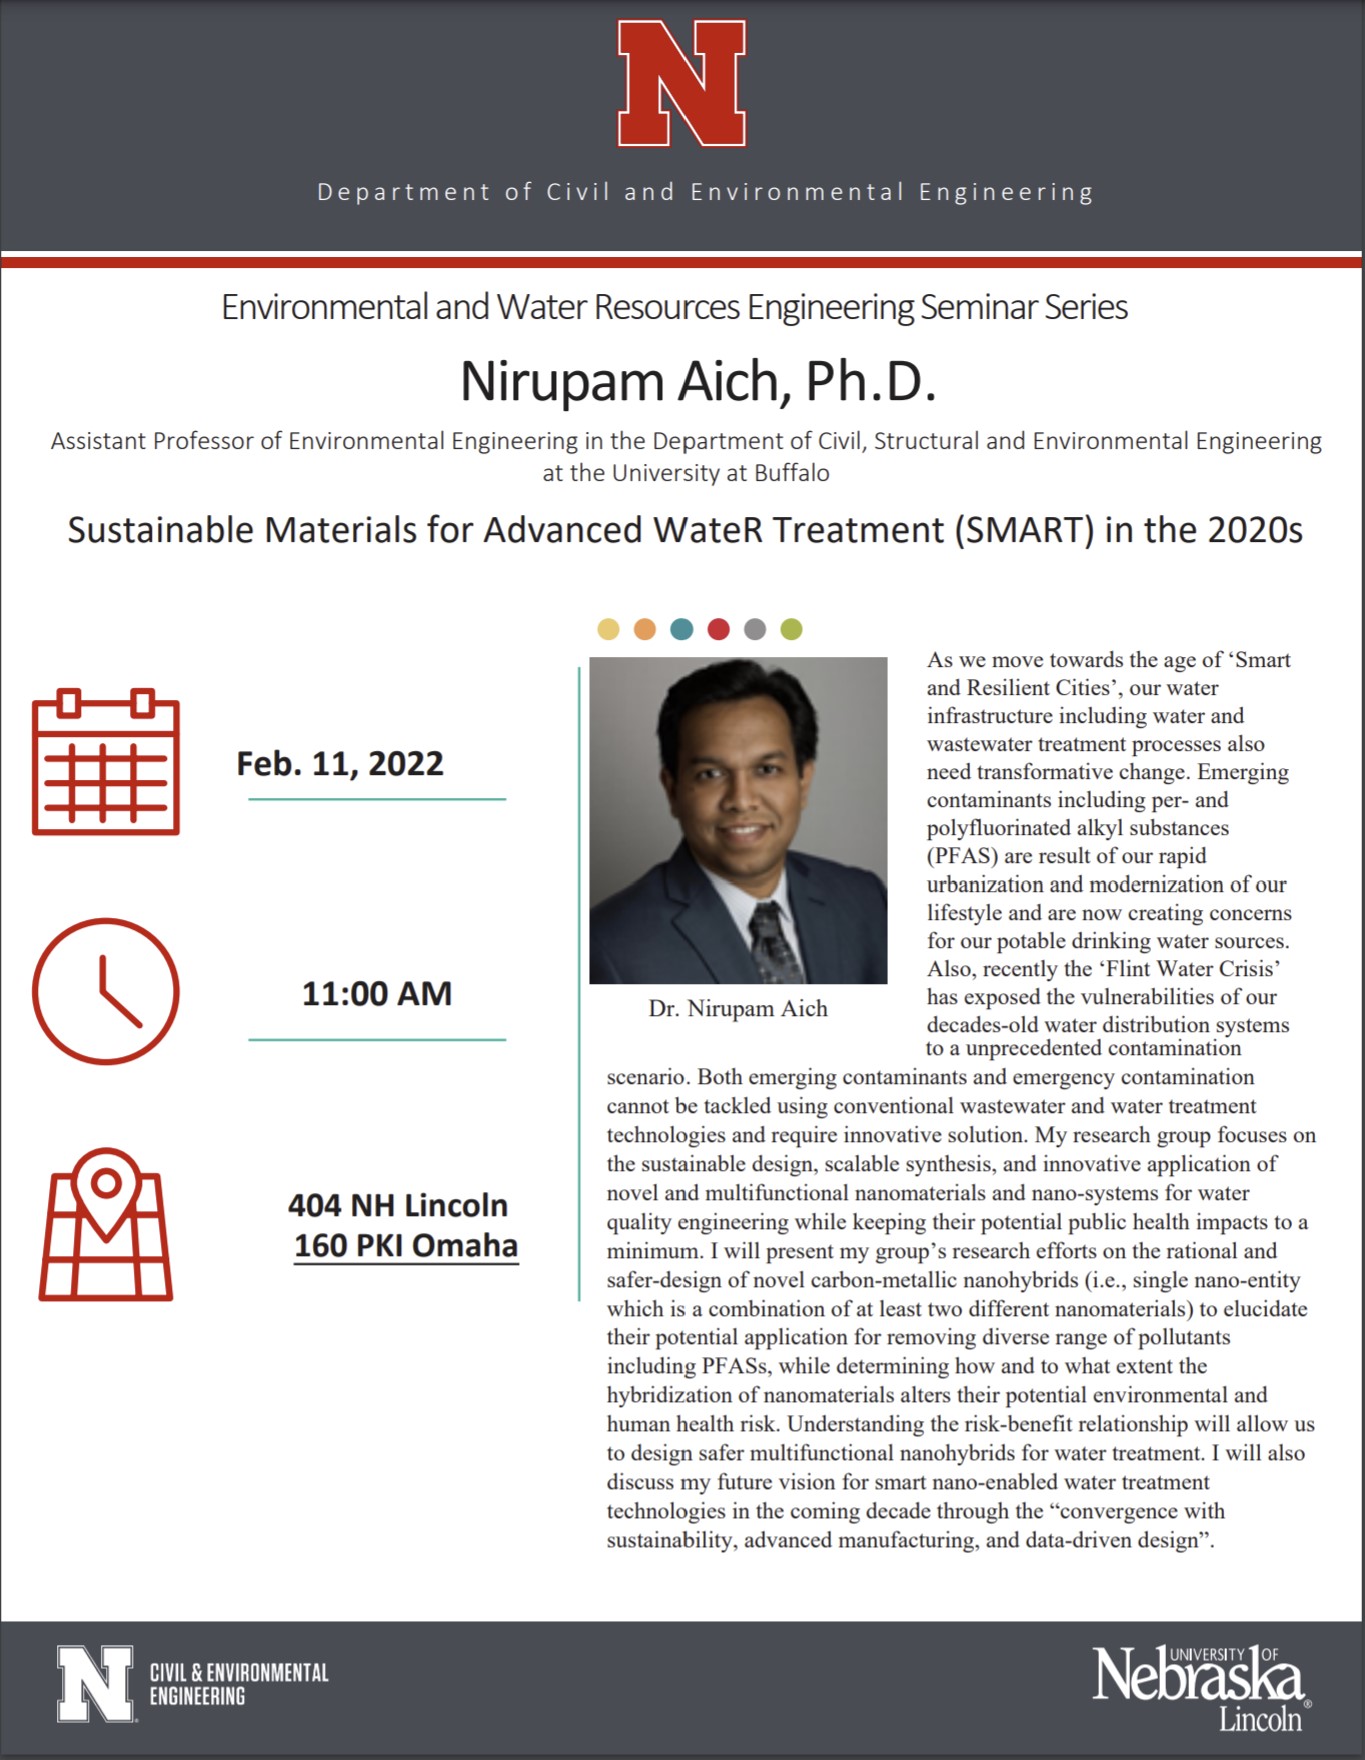 Environmental and Water Resources Engineering Seminar Series- February 11th